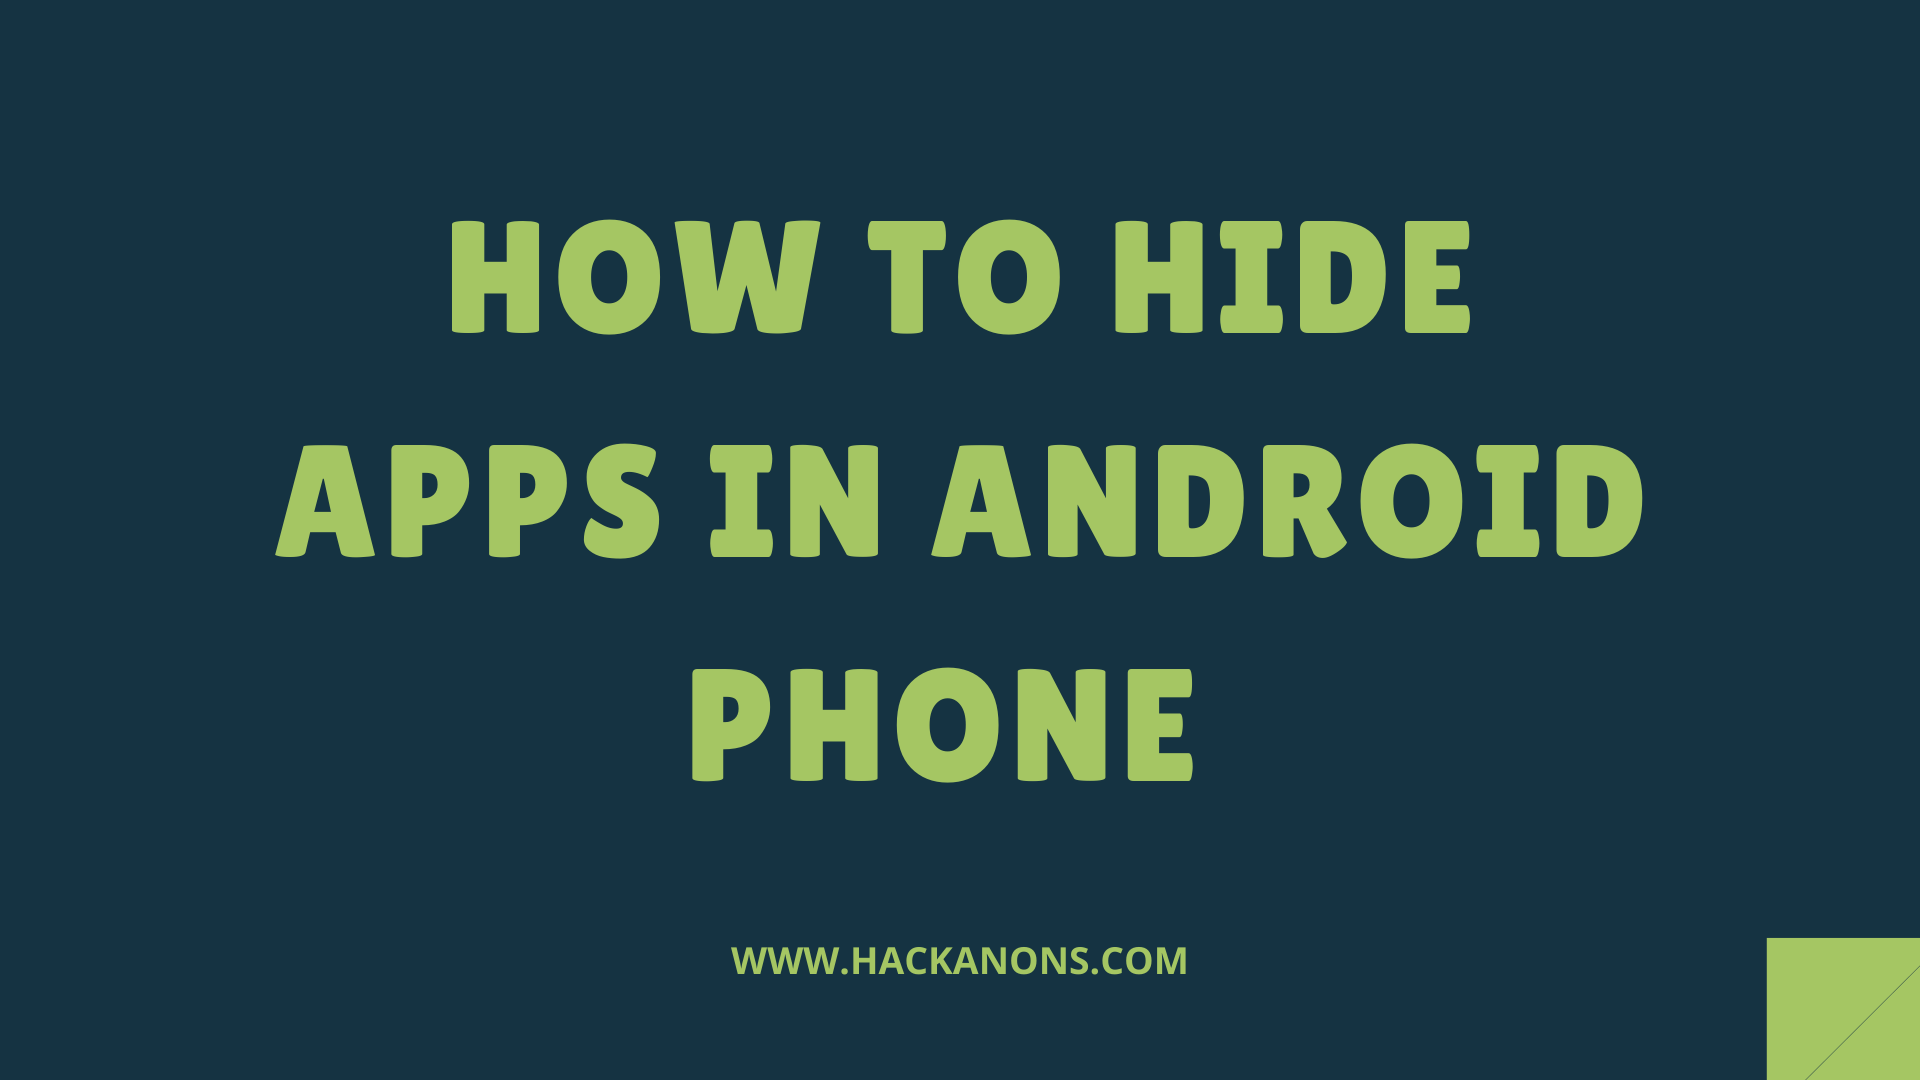 HOW TO HIDE APPS IN ANDROID PHONE